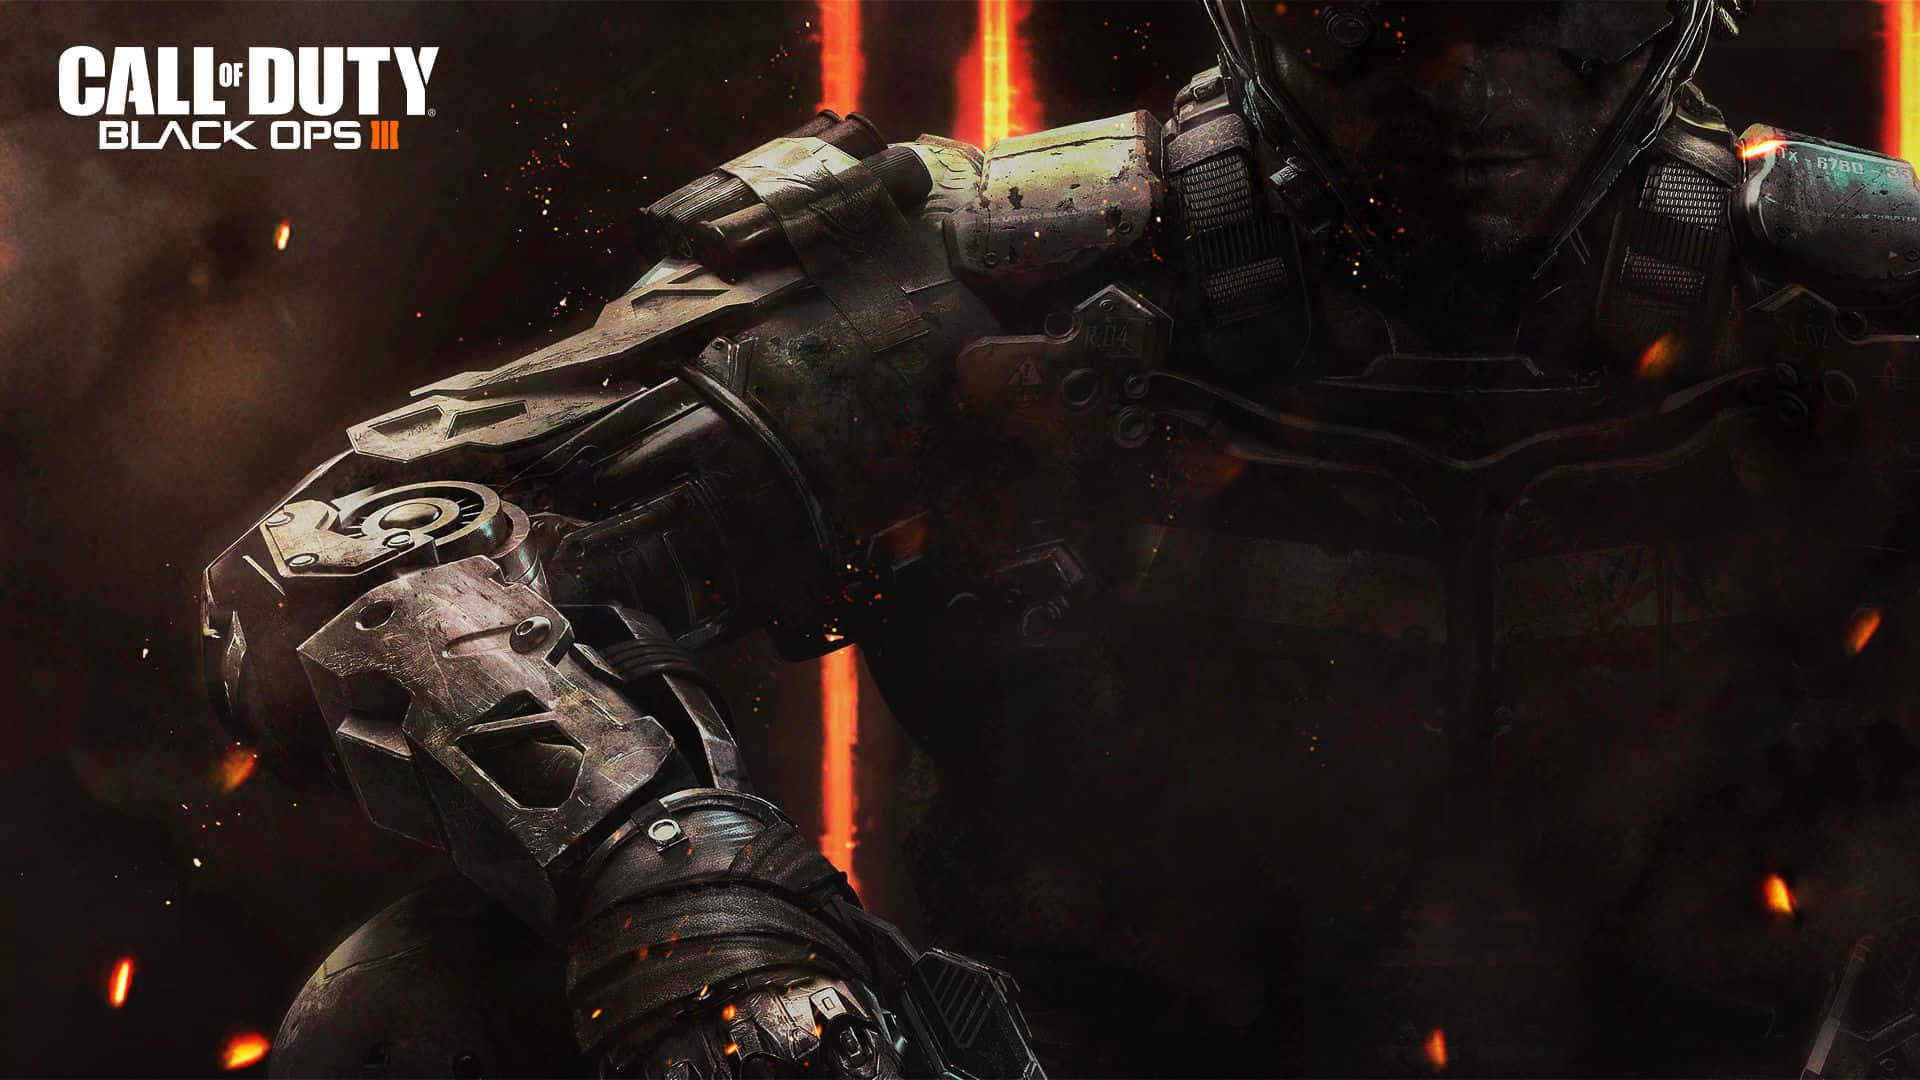 Get Ready To Attack - Black Ops 3 Wallpaper